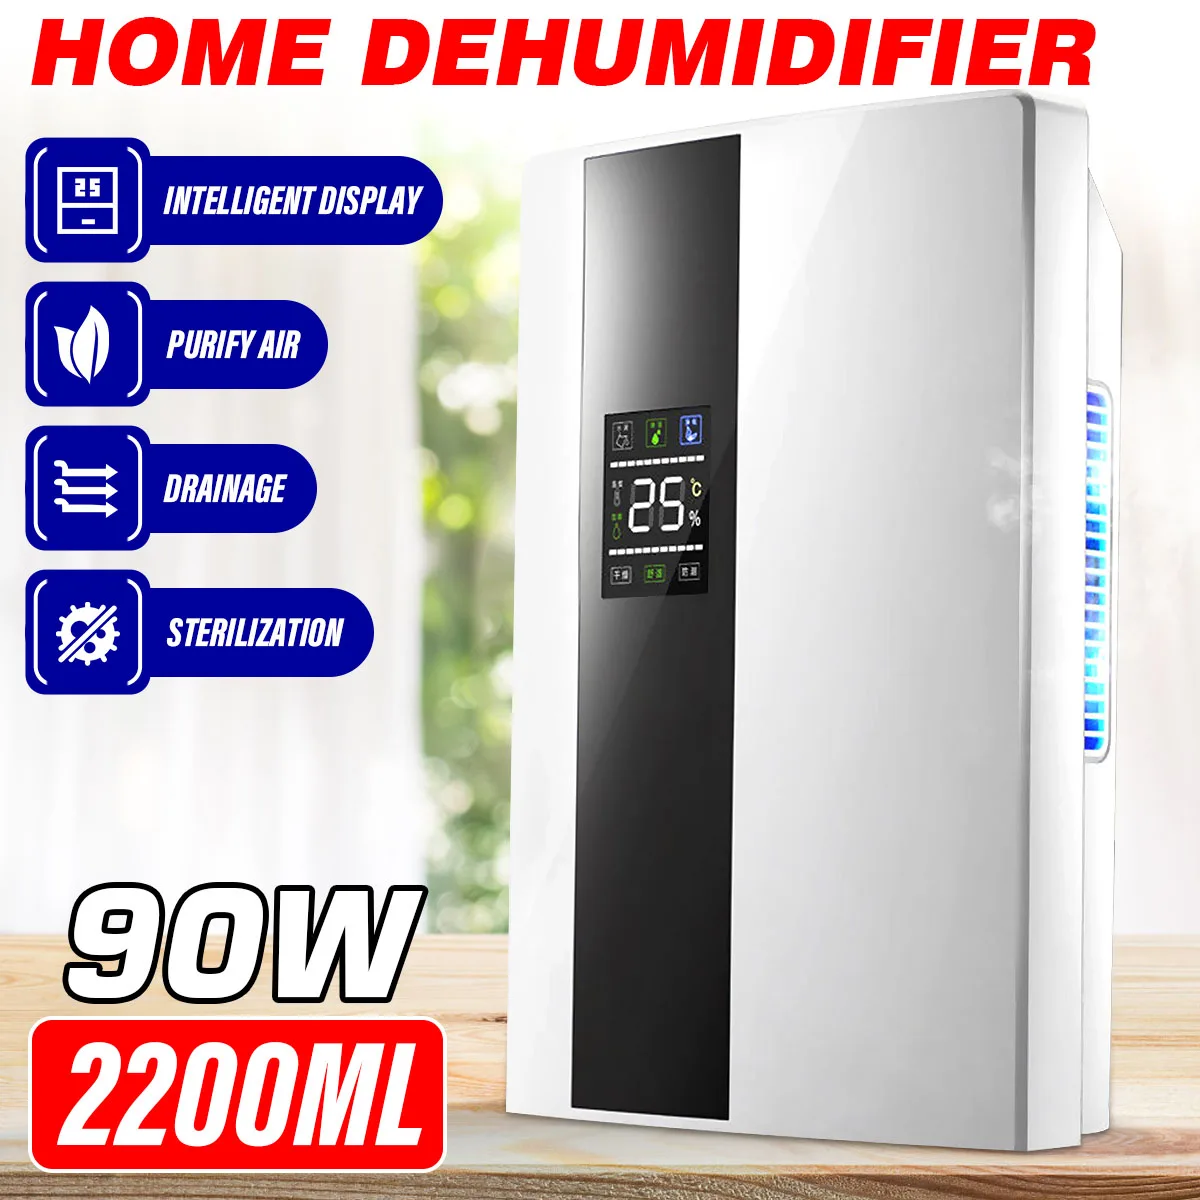 

2.2L Dehumidifier Moisture Absorber Home Dehumidifier Basement Moisture Absorber Mute Remote Control Timing External Water Pipe